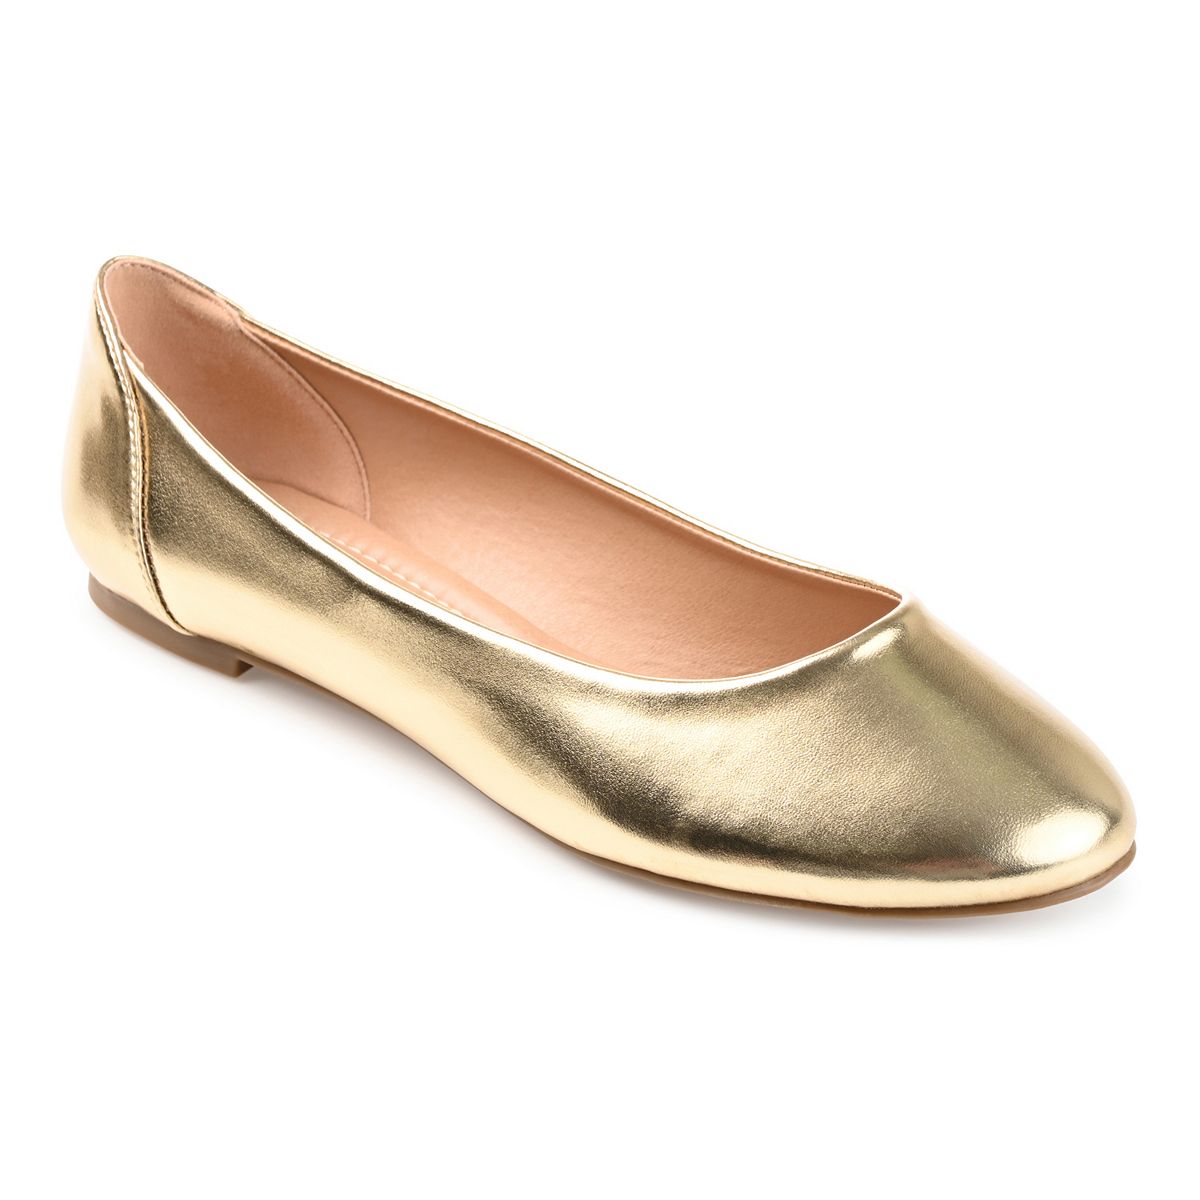 Ballet flats are back! Here's how to style them for fall - Good Morning ...